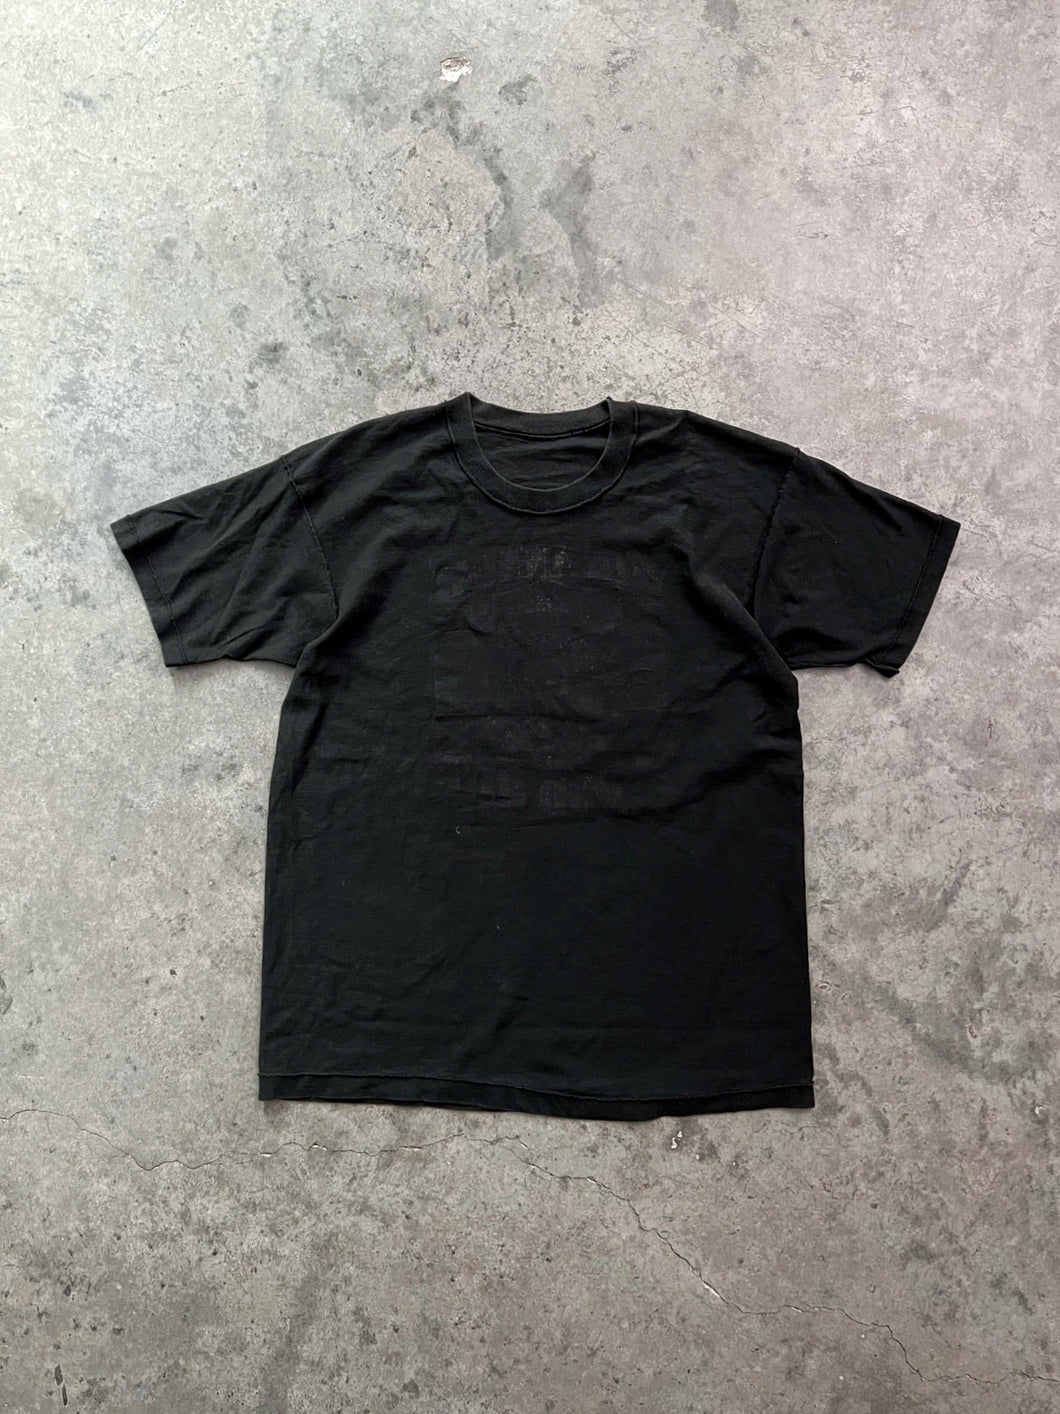 SINGLE STITCHED FADED BLACK INSIDE OUT TEE - 1990S